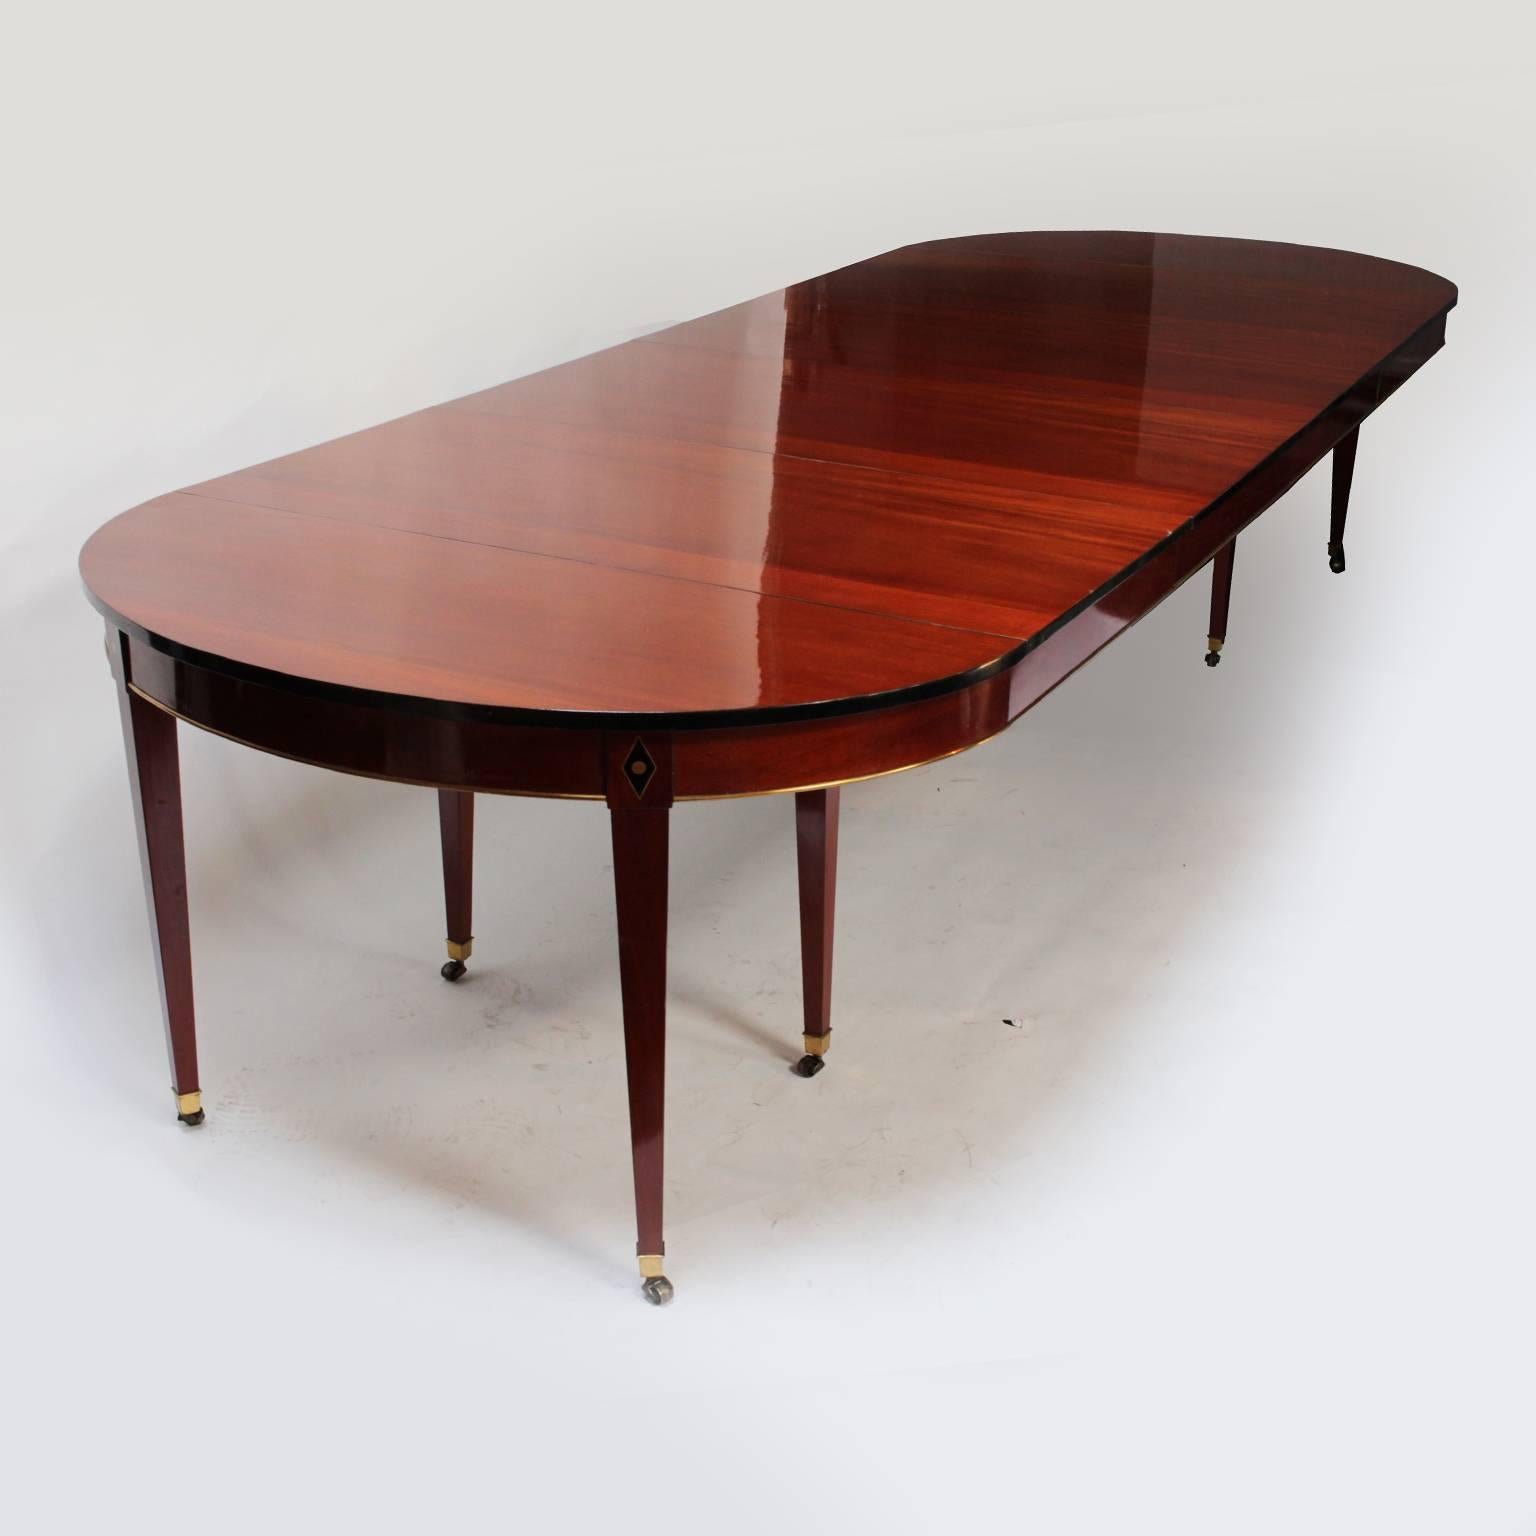 Charles X First Quater 19th Century Dining Room Table in the Style of Jean-Joseph Chapuis